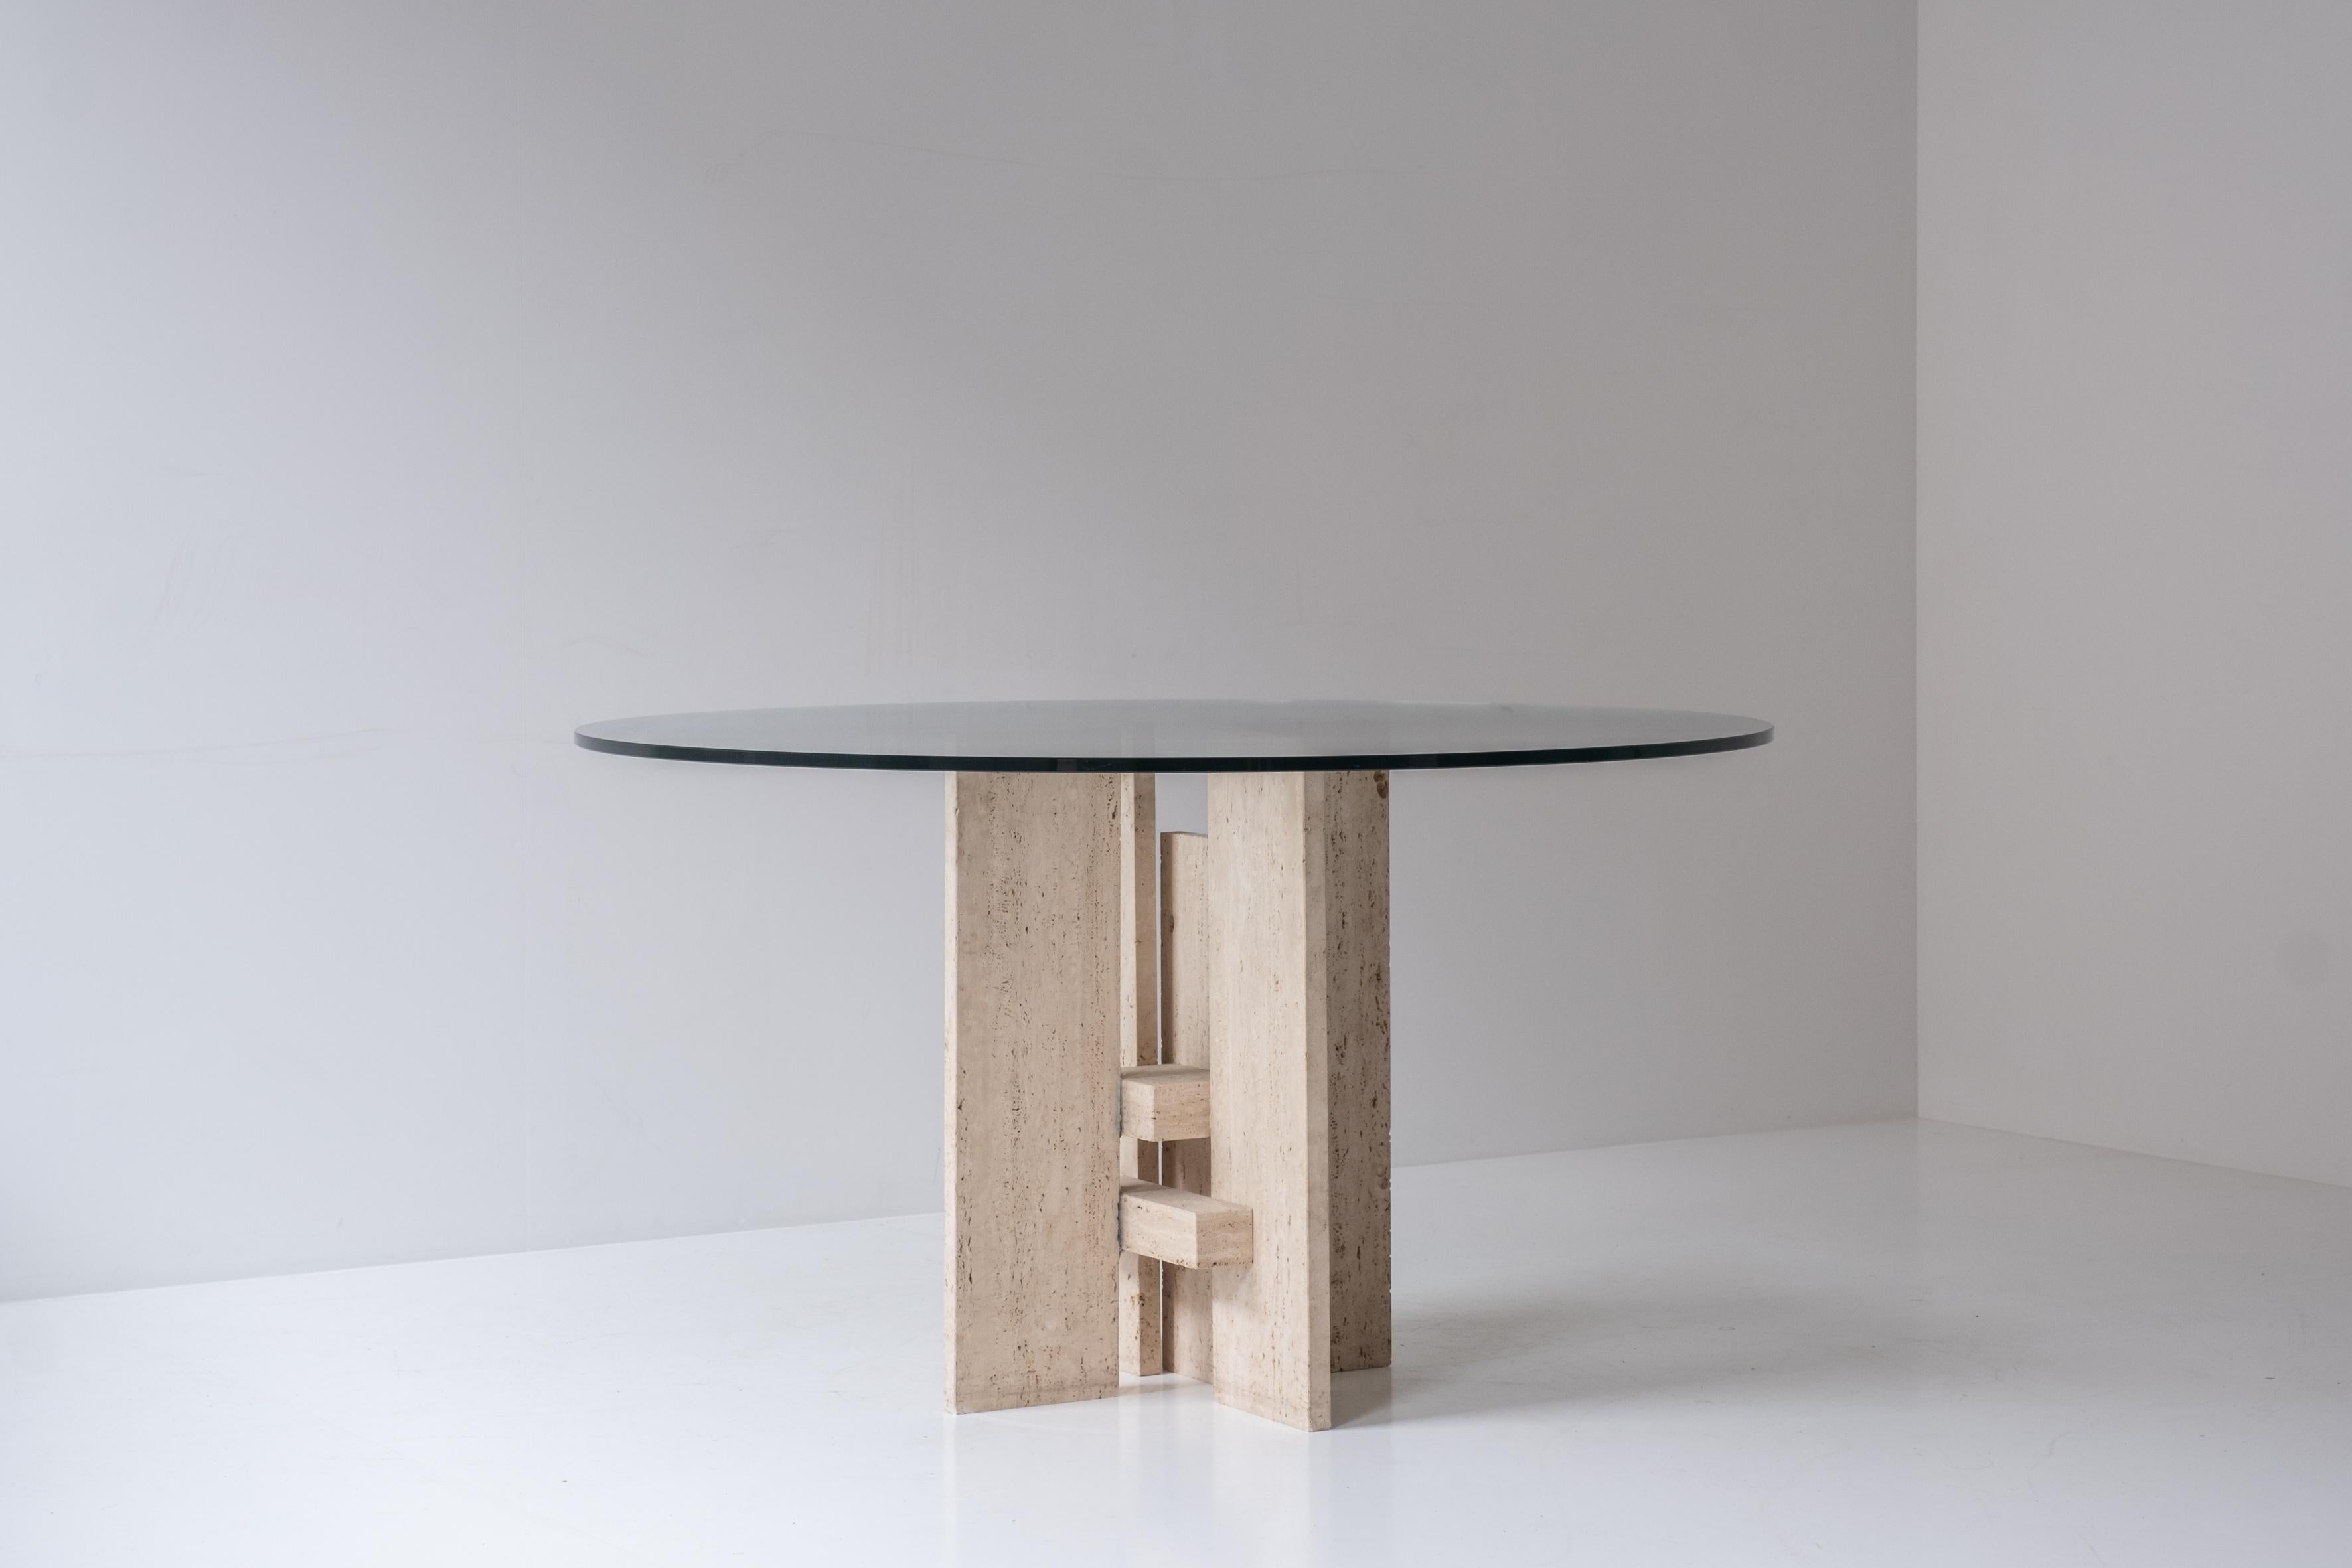 Travertine table with sculptural base designed and manufactured in the 1970s. This table features a round glass top and has a gorgeous sculptural base. Suits perfectly as a center piece. Very elegant and charming piece in its original and good